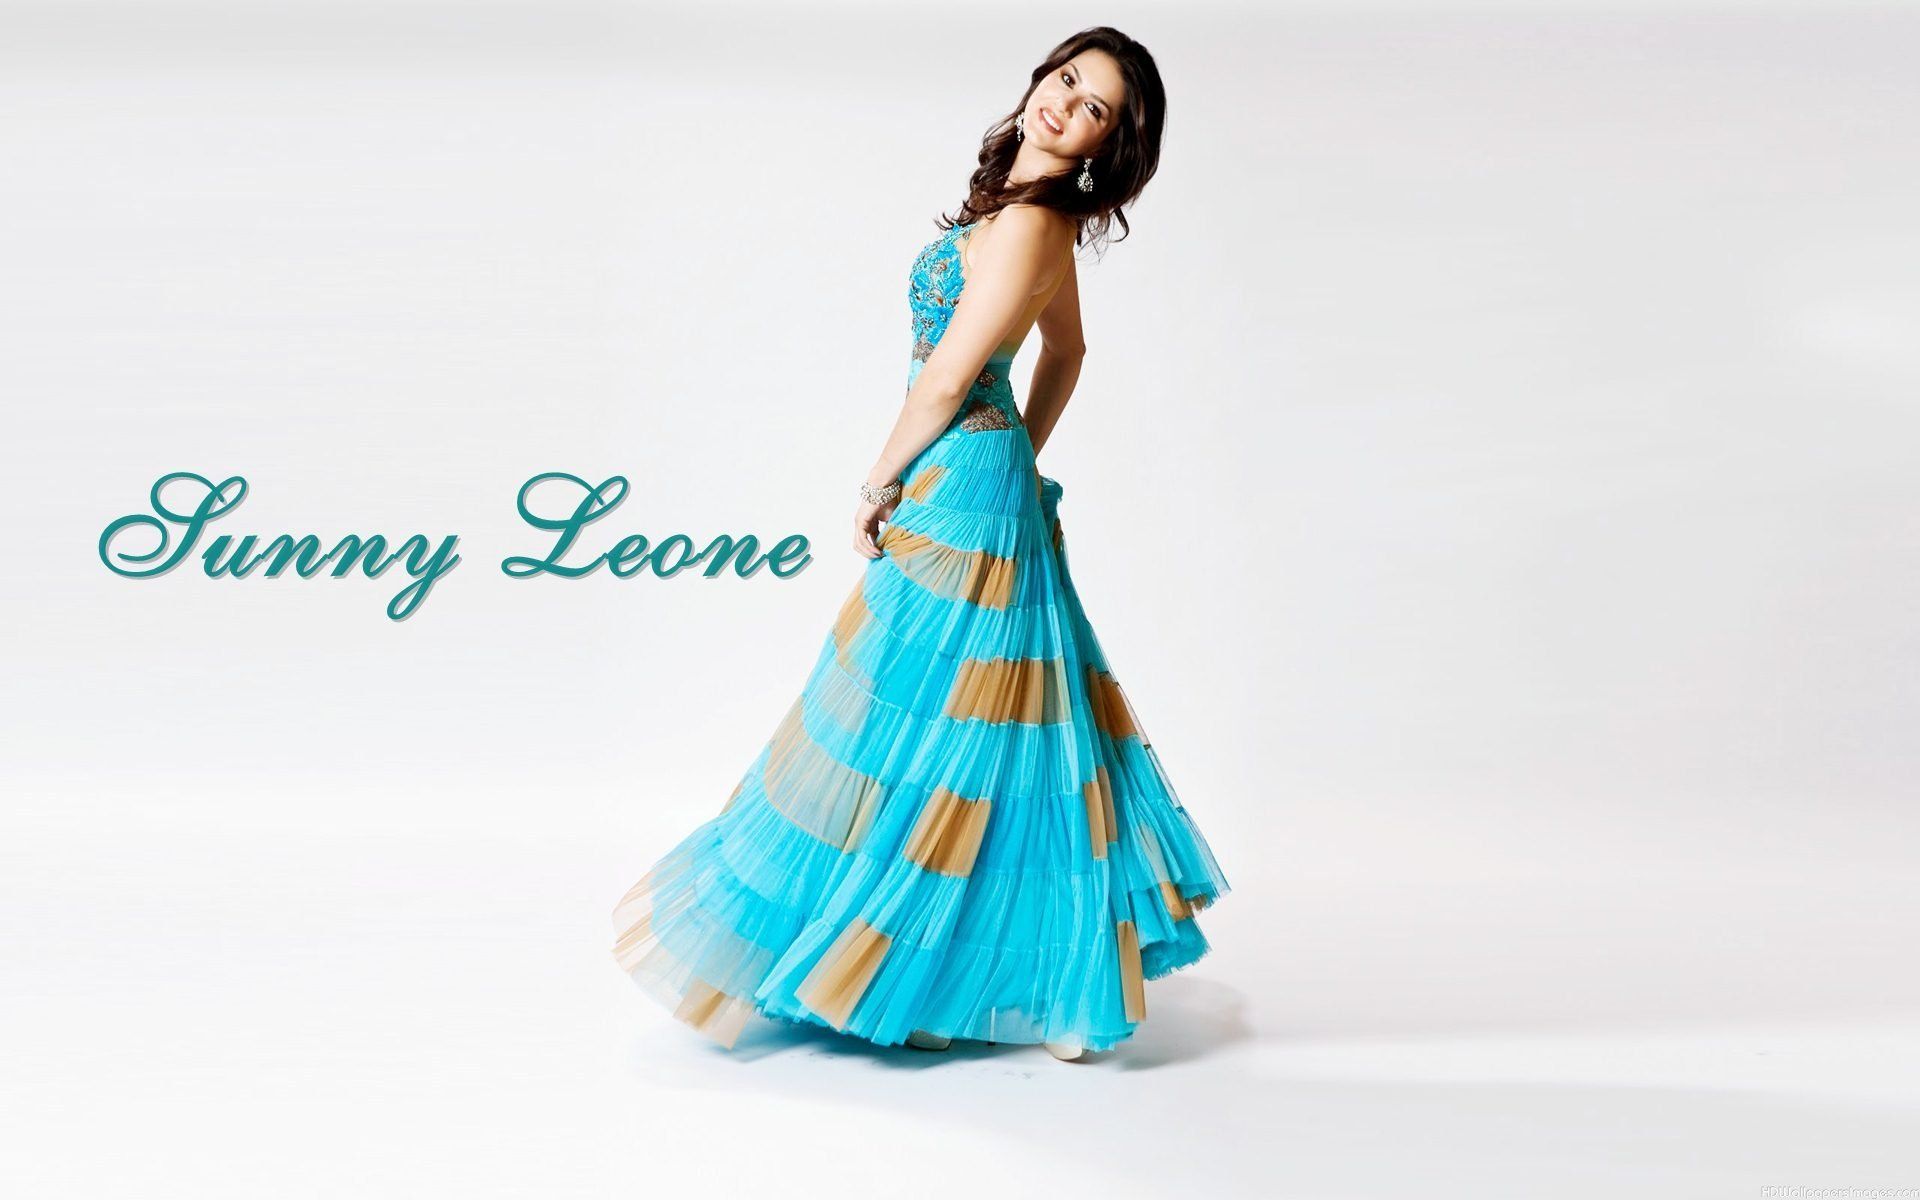 Sunny Leone HD Wallpapers - HD WallpapersHD Wallpapers